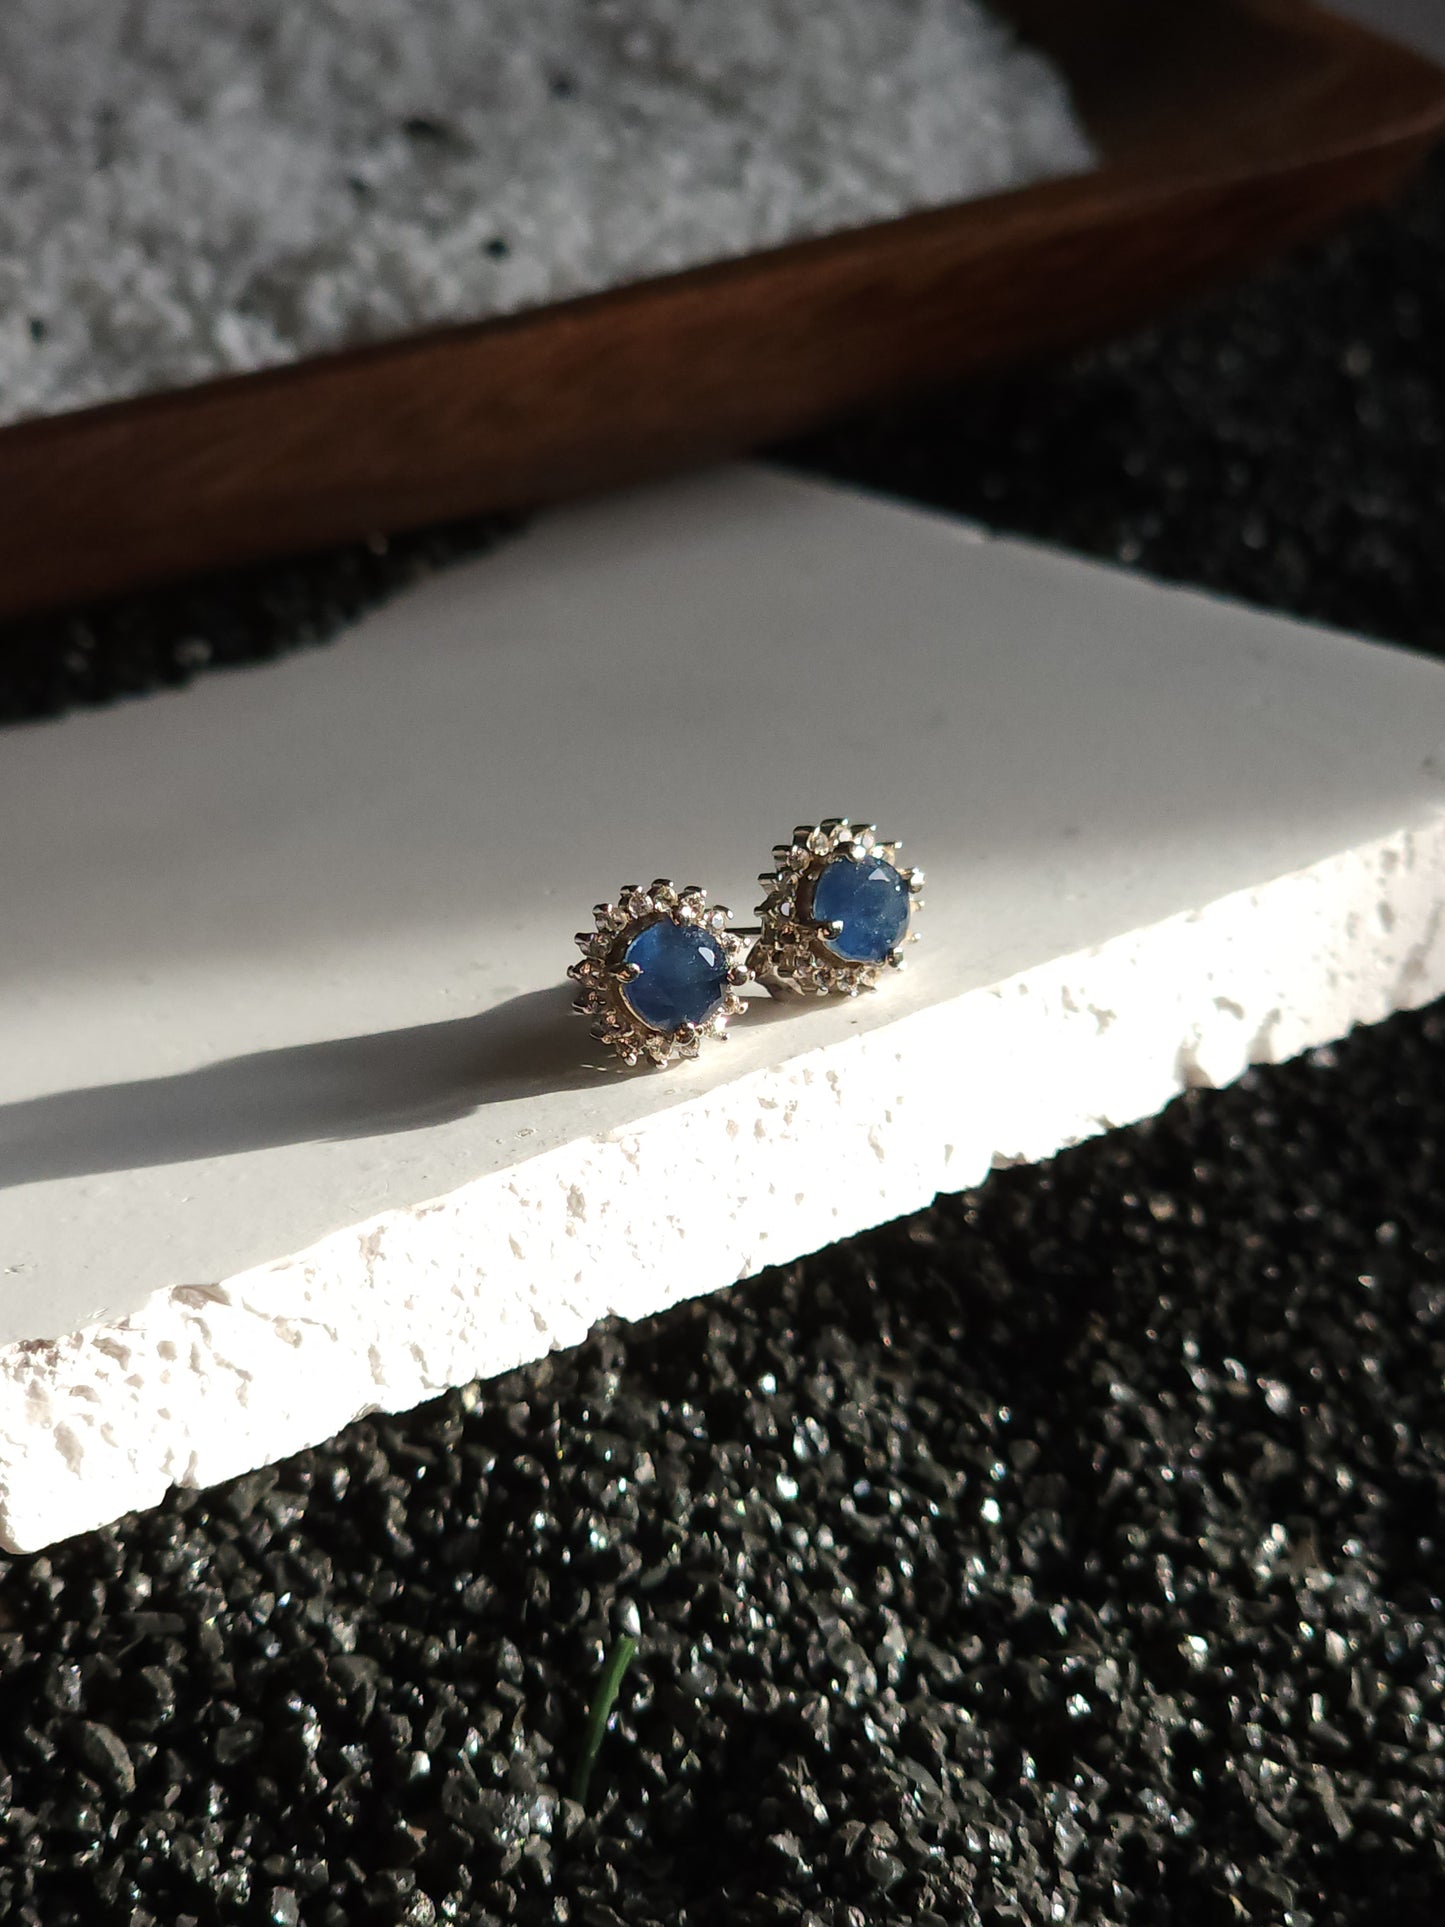 Tyrell Topaz Floral Pave Sapphire Earrings